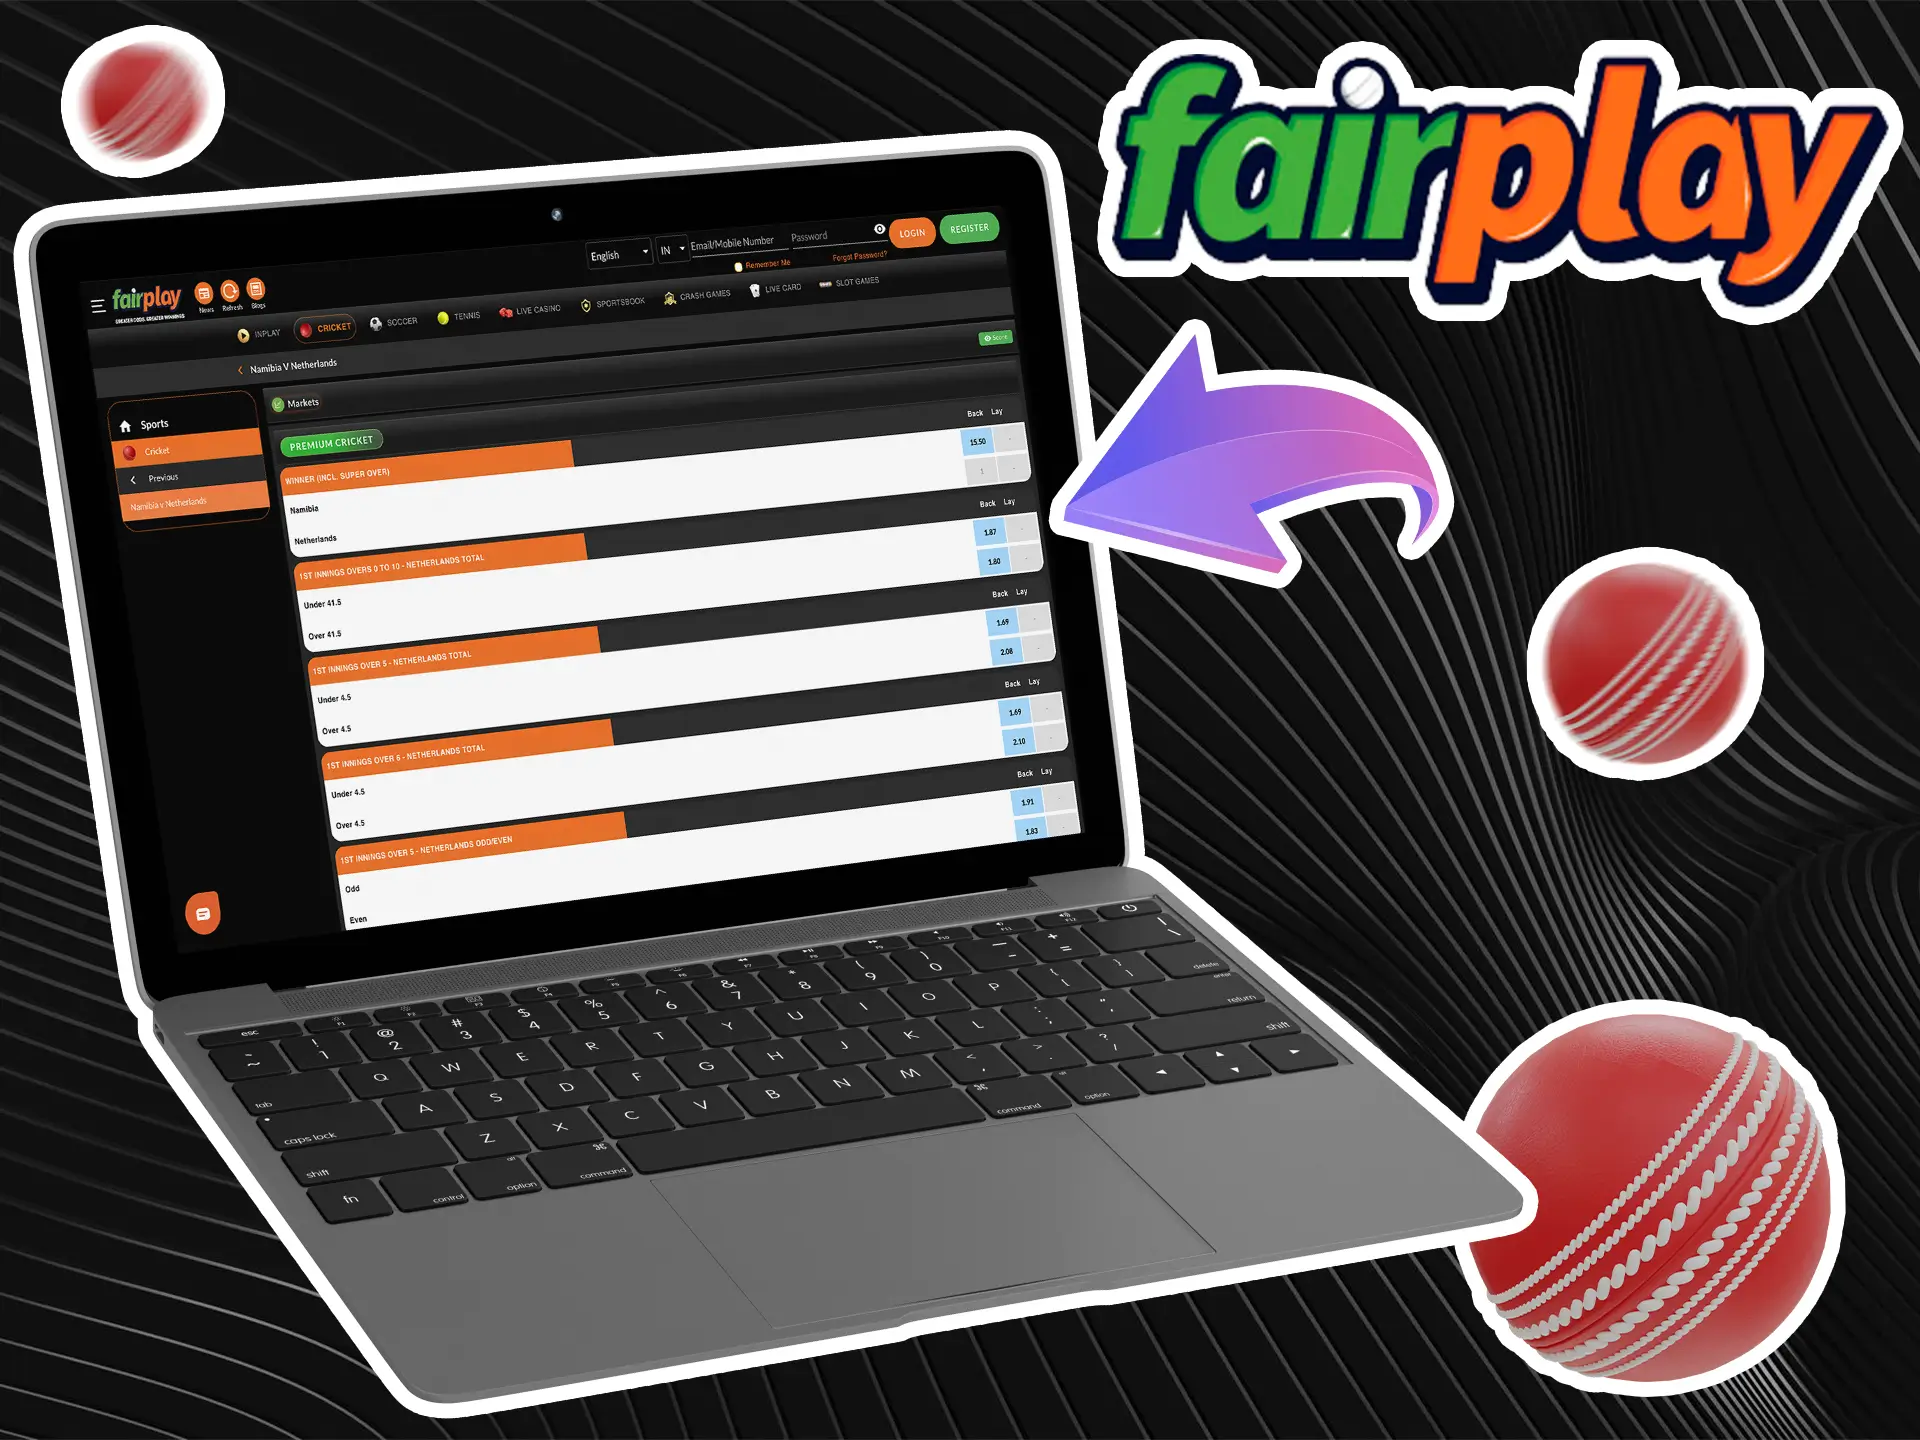 Go to the Fairplay site and make your first winning bet using the casino bonuses.